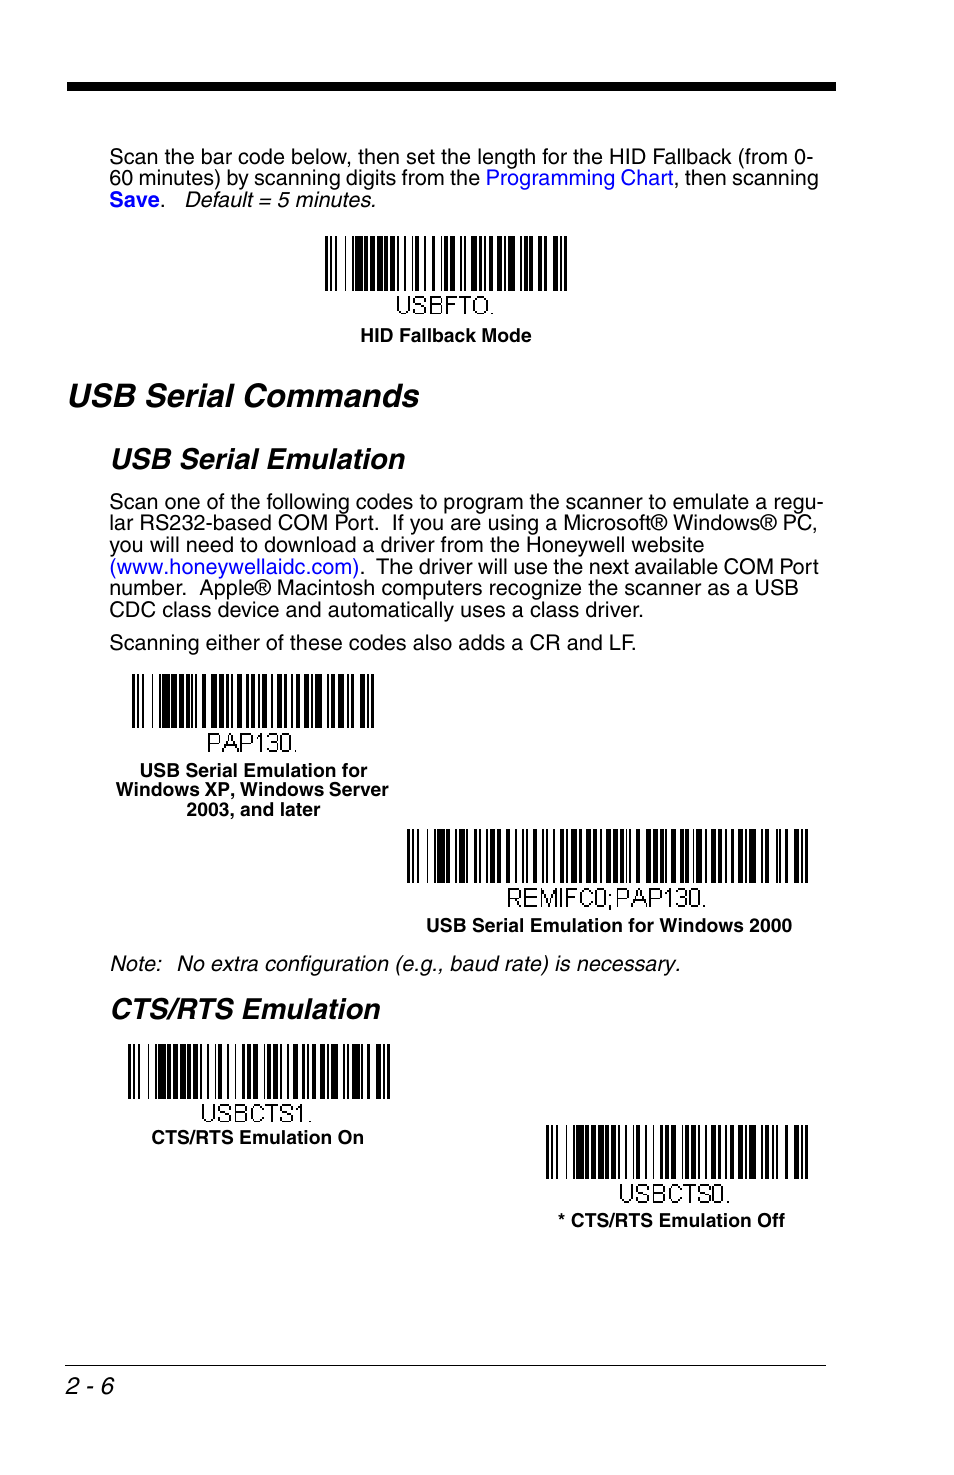 Usb serial commands, Usb serial emulation, Cts/rts emulation | Honeywell  VOYAGER 1200G User Manual | Page 28 / 238